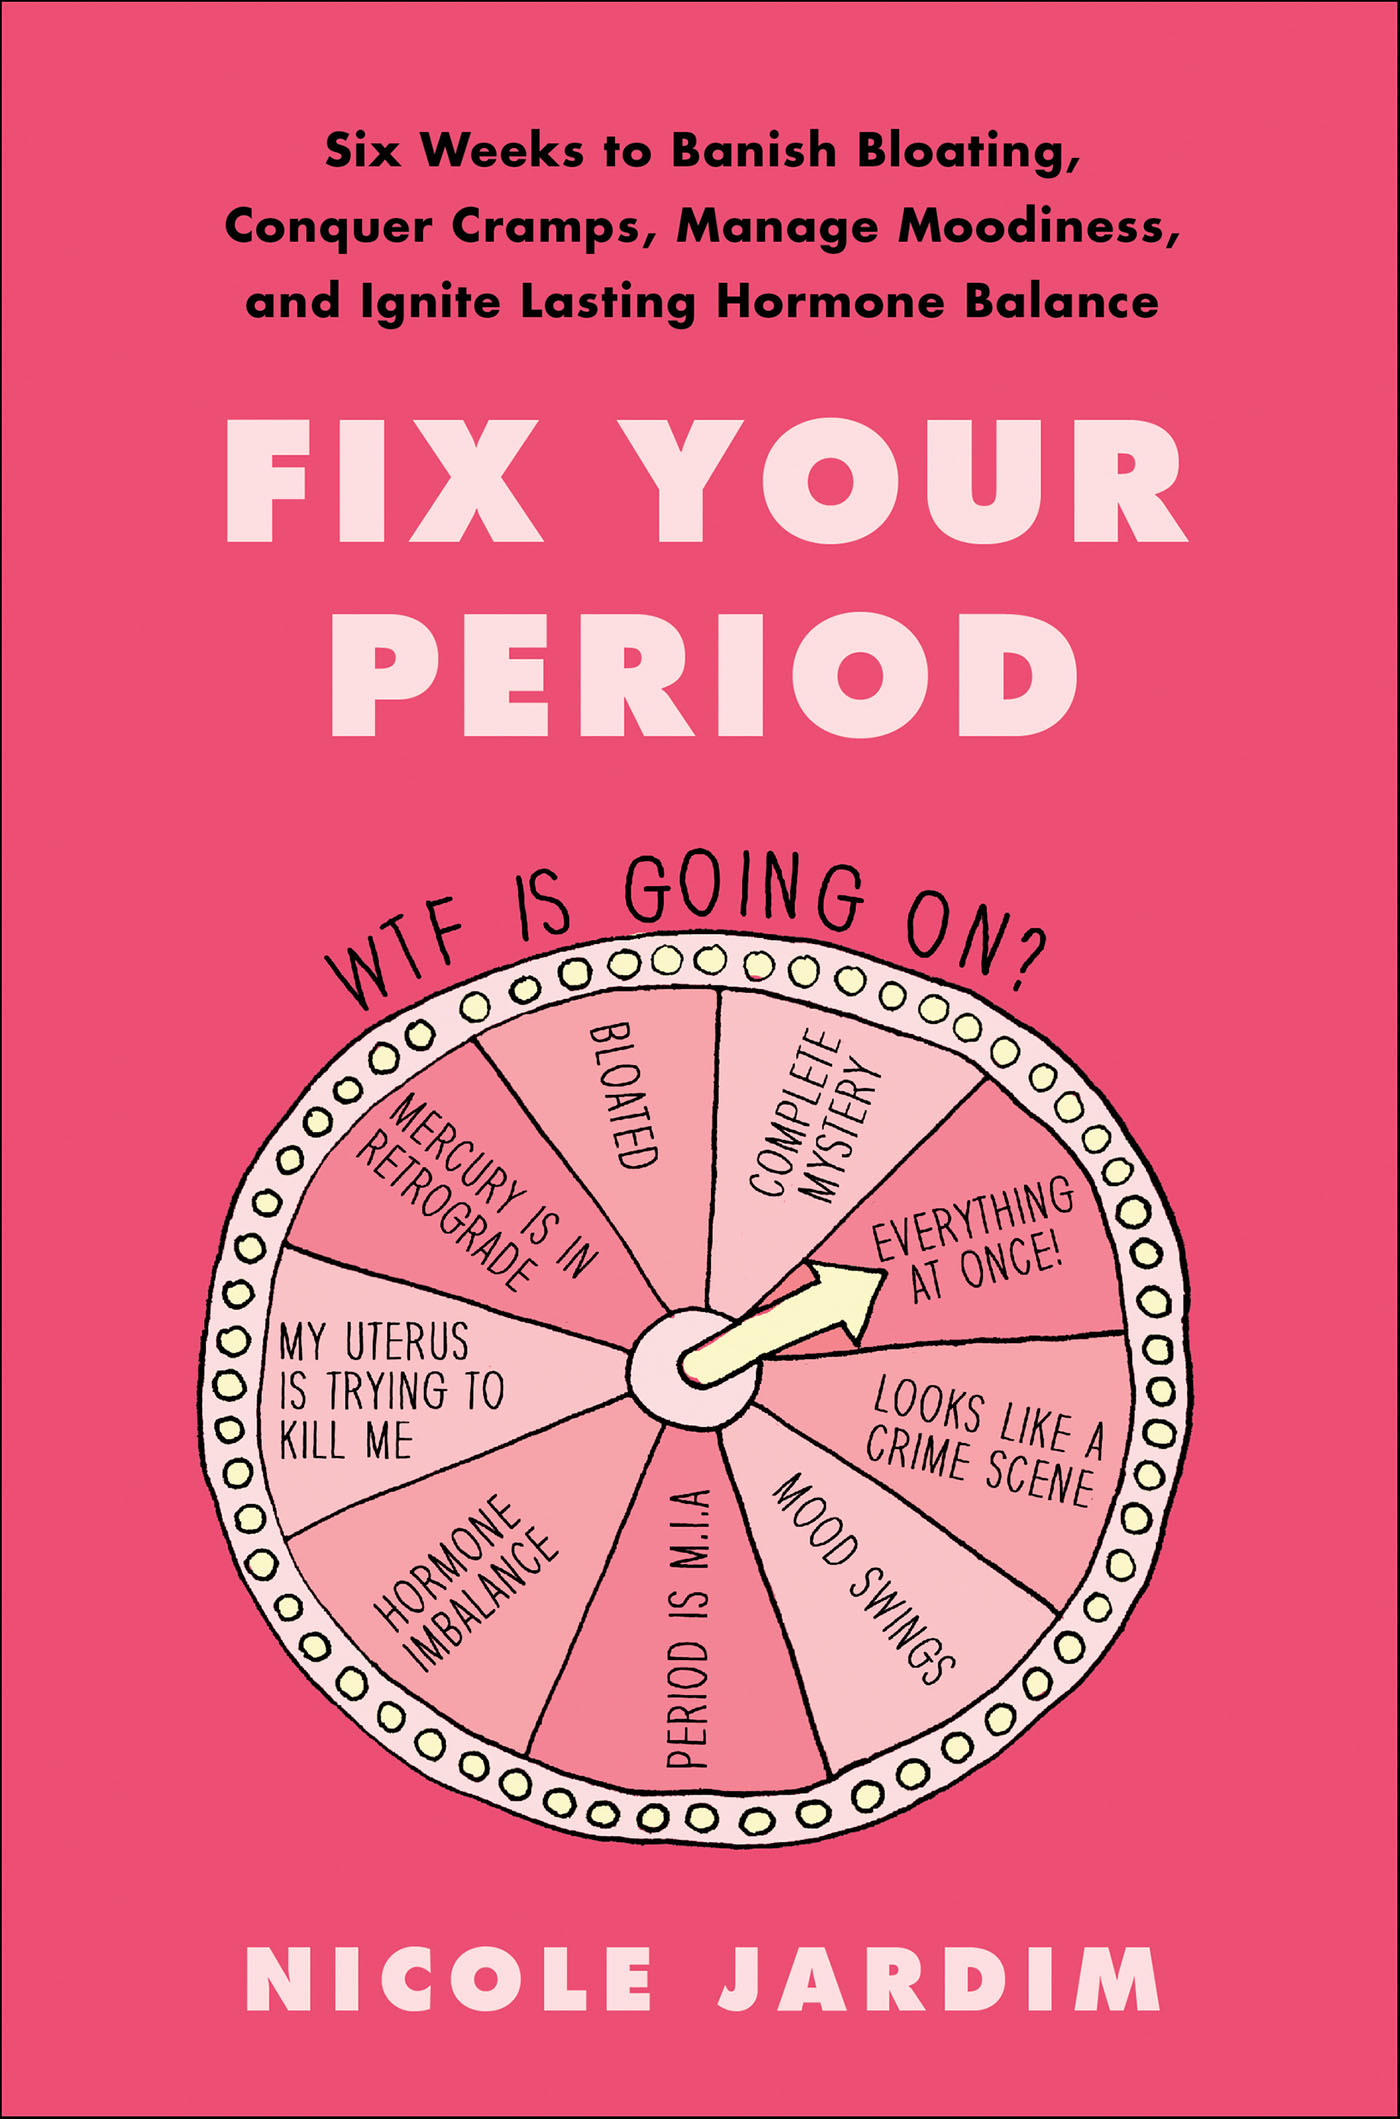 Fix Your Period Six Weeks to Banish Bloating, Conquer Cramps, Manage Moodiness, and Ignite Lasting Hormone Balance cover image